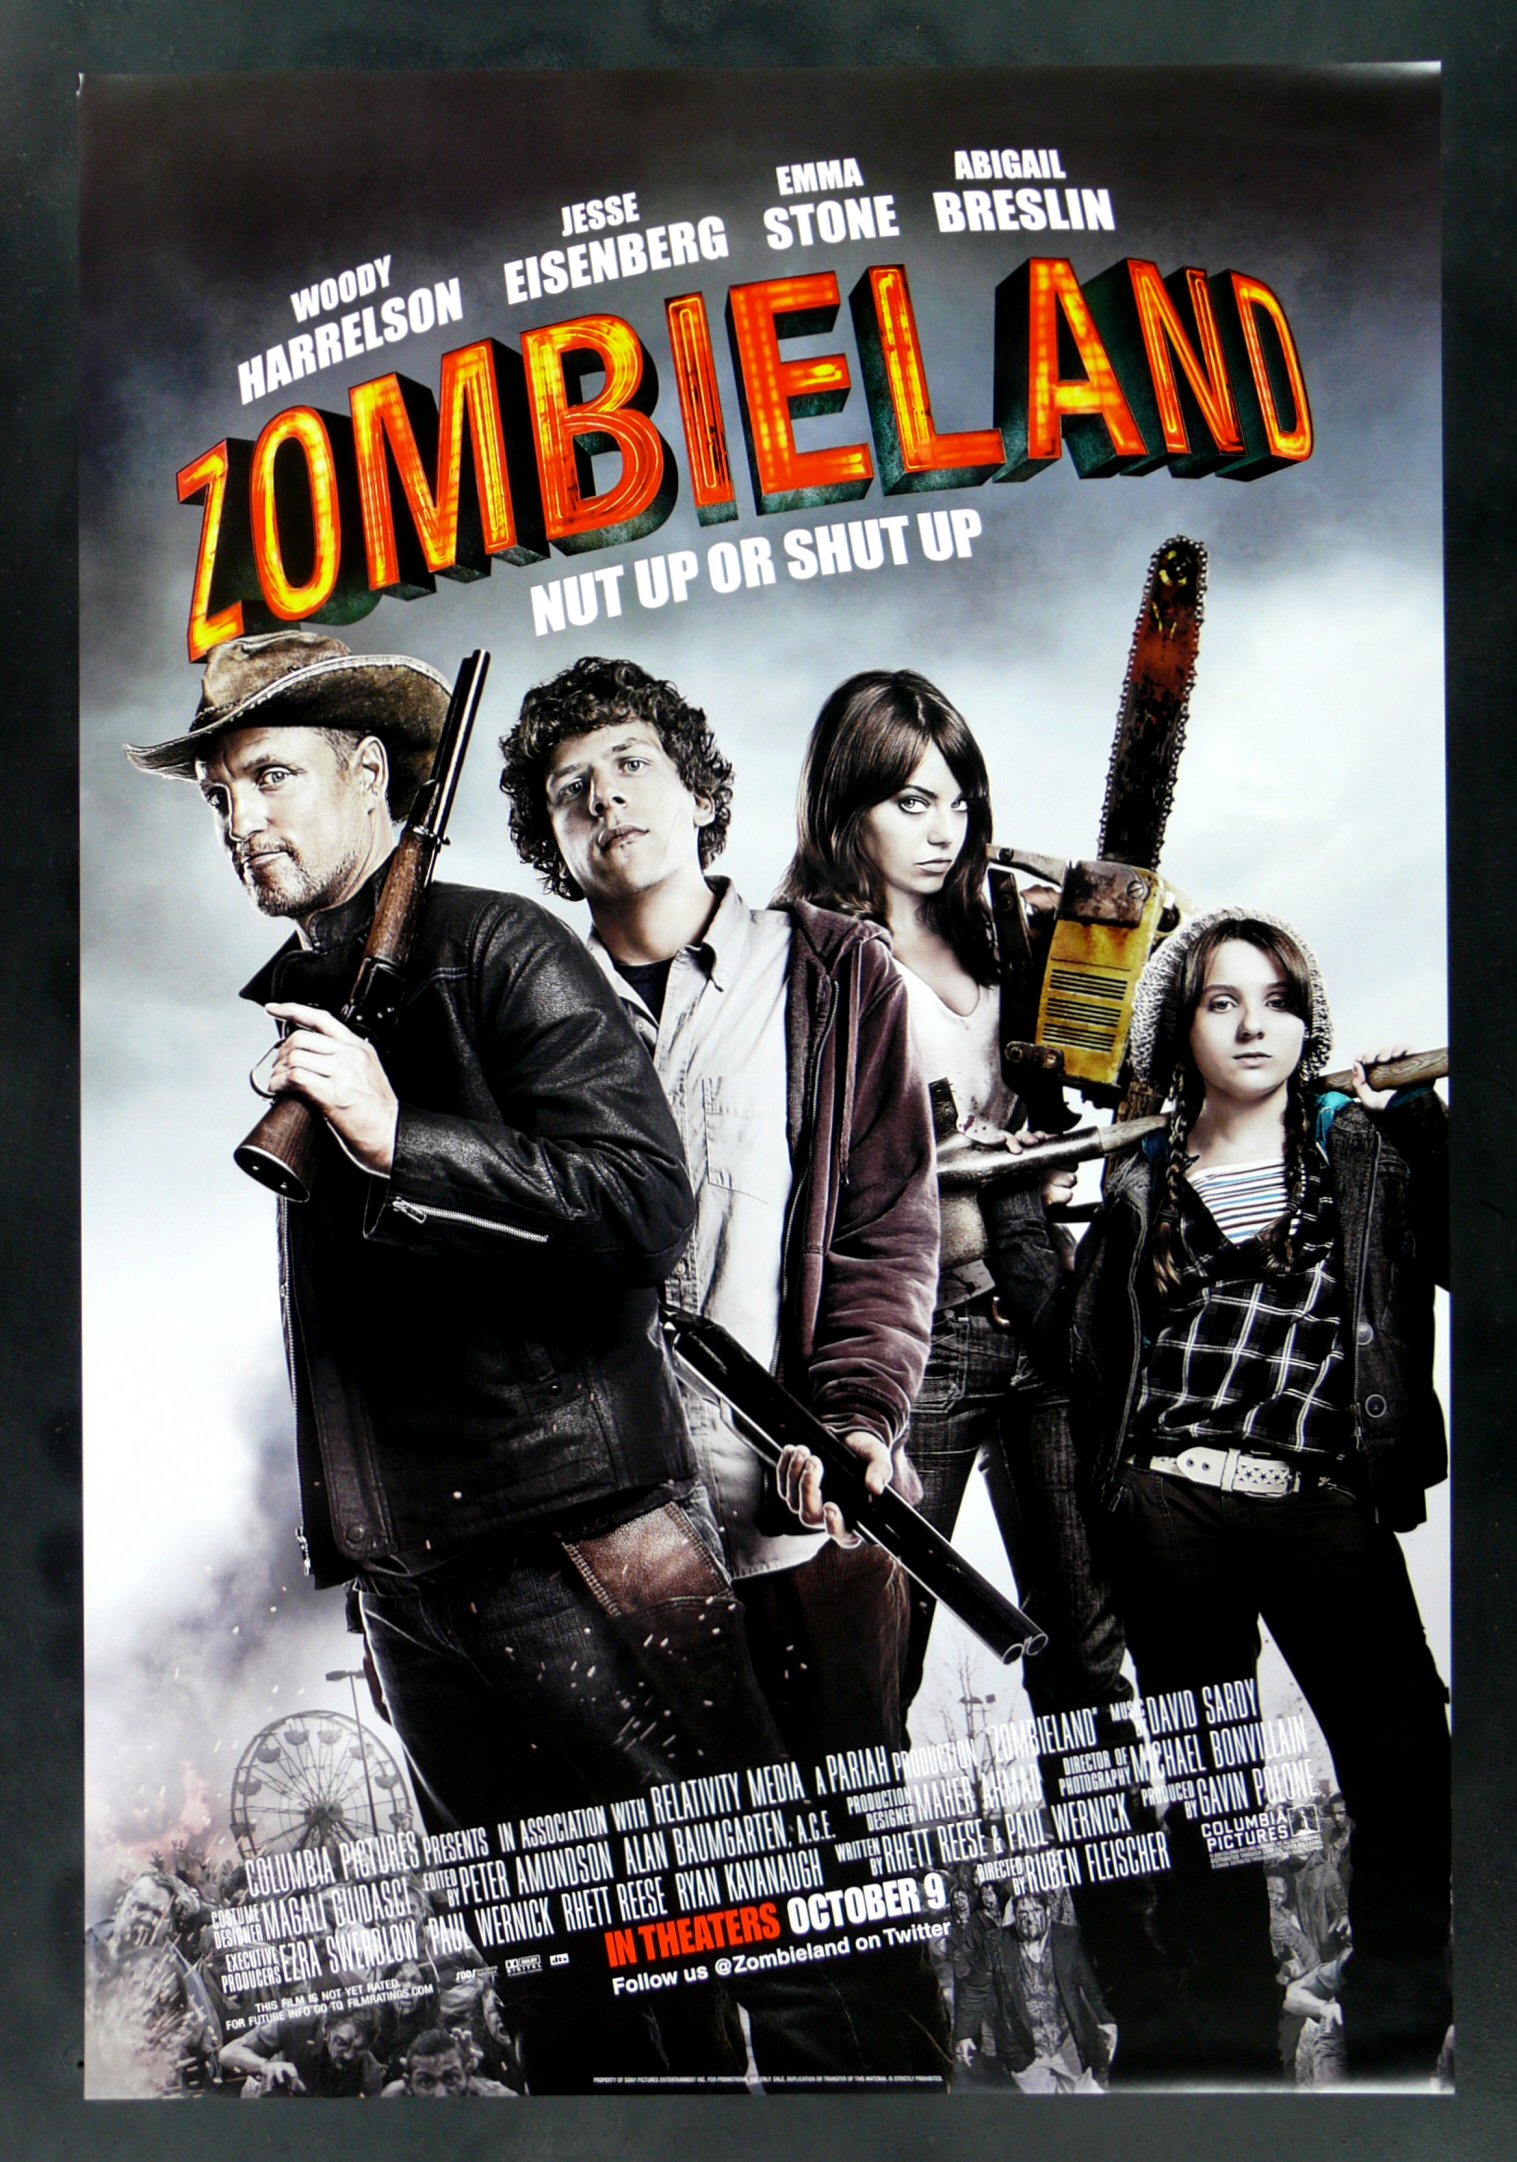  Zombie  Movie  Posters  Film Posters  Cinema Posters  